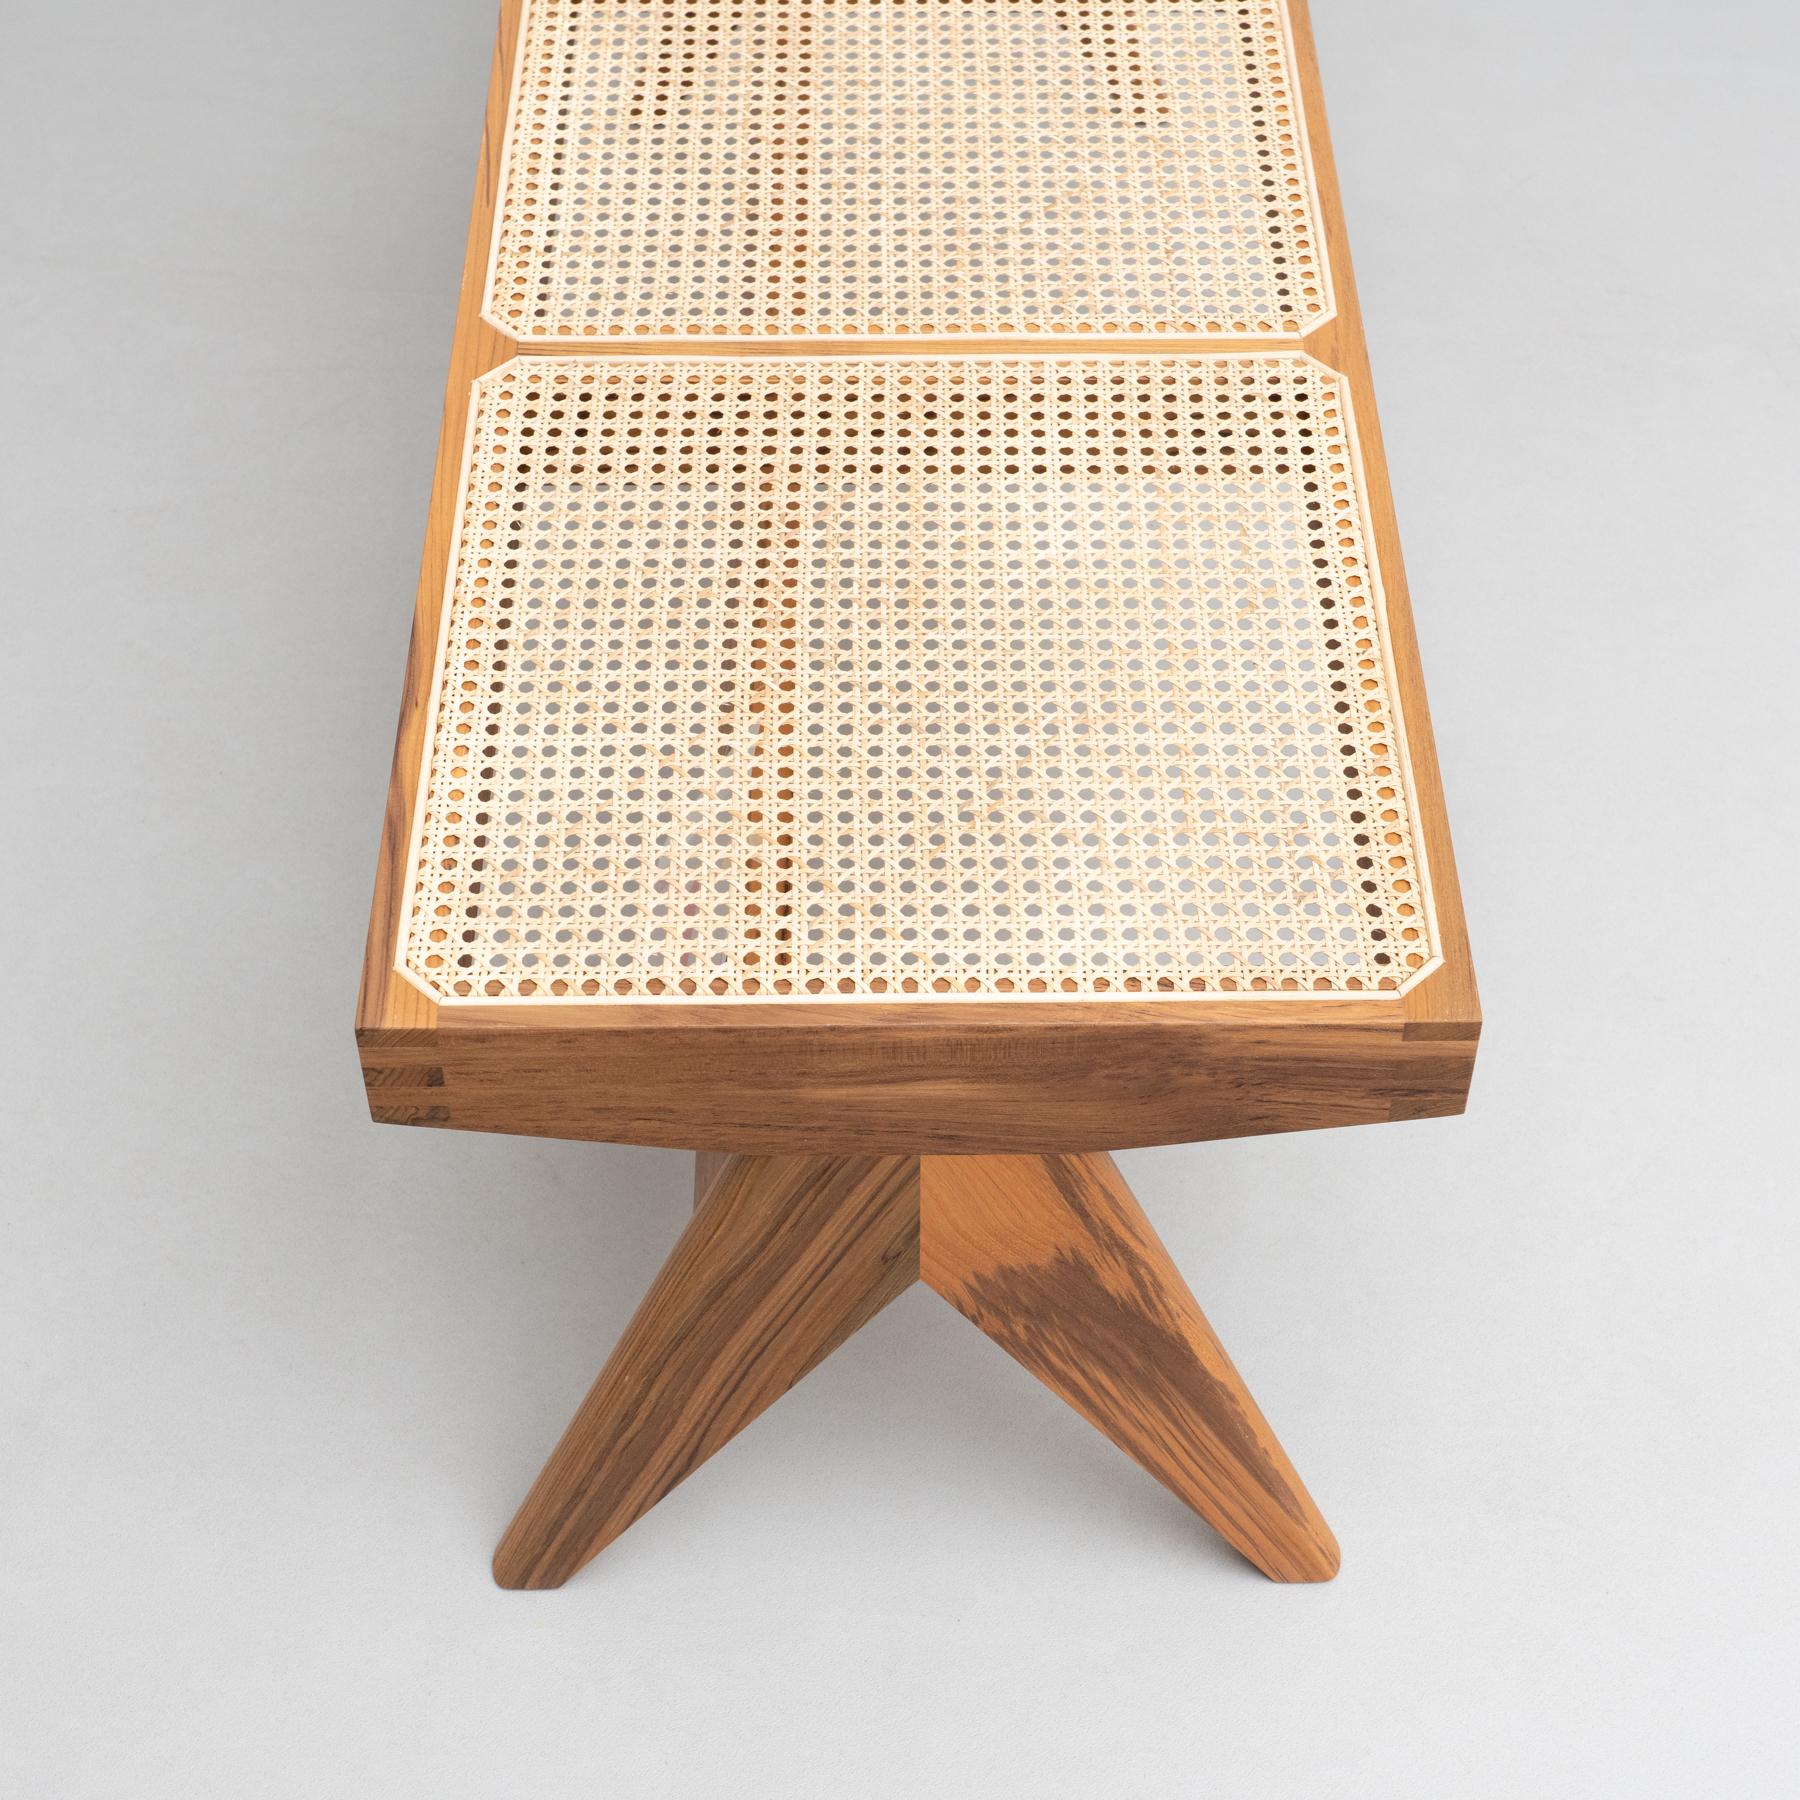 Pierre Jeanneret 057 Civil Bench, Wood and Woven Viennese Cane 8